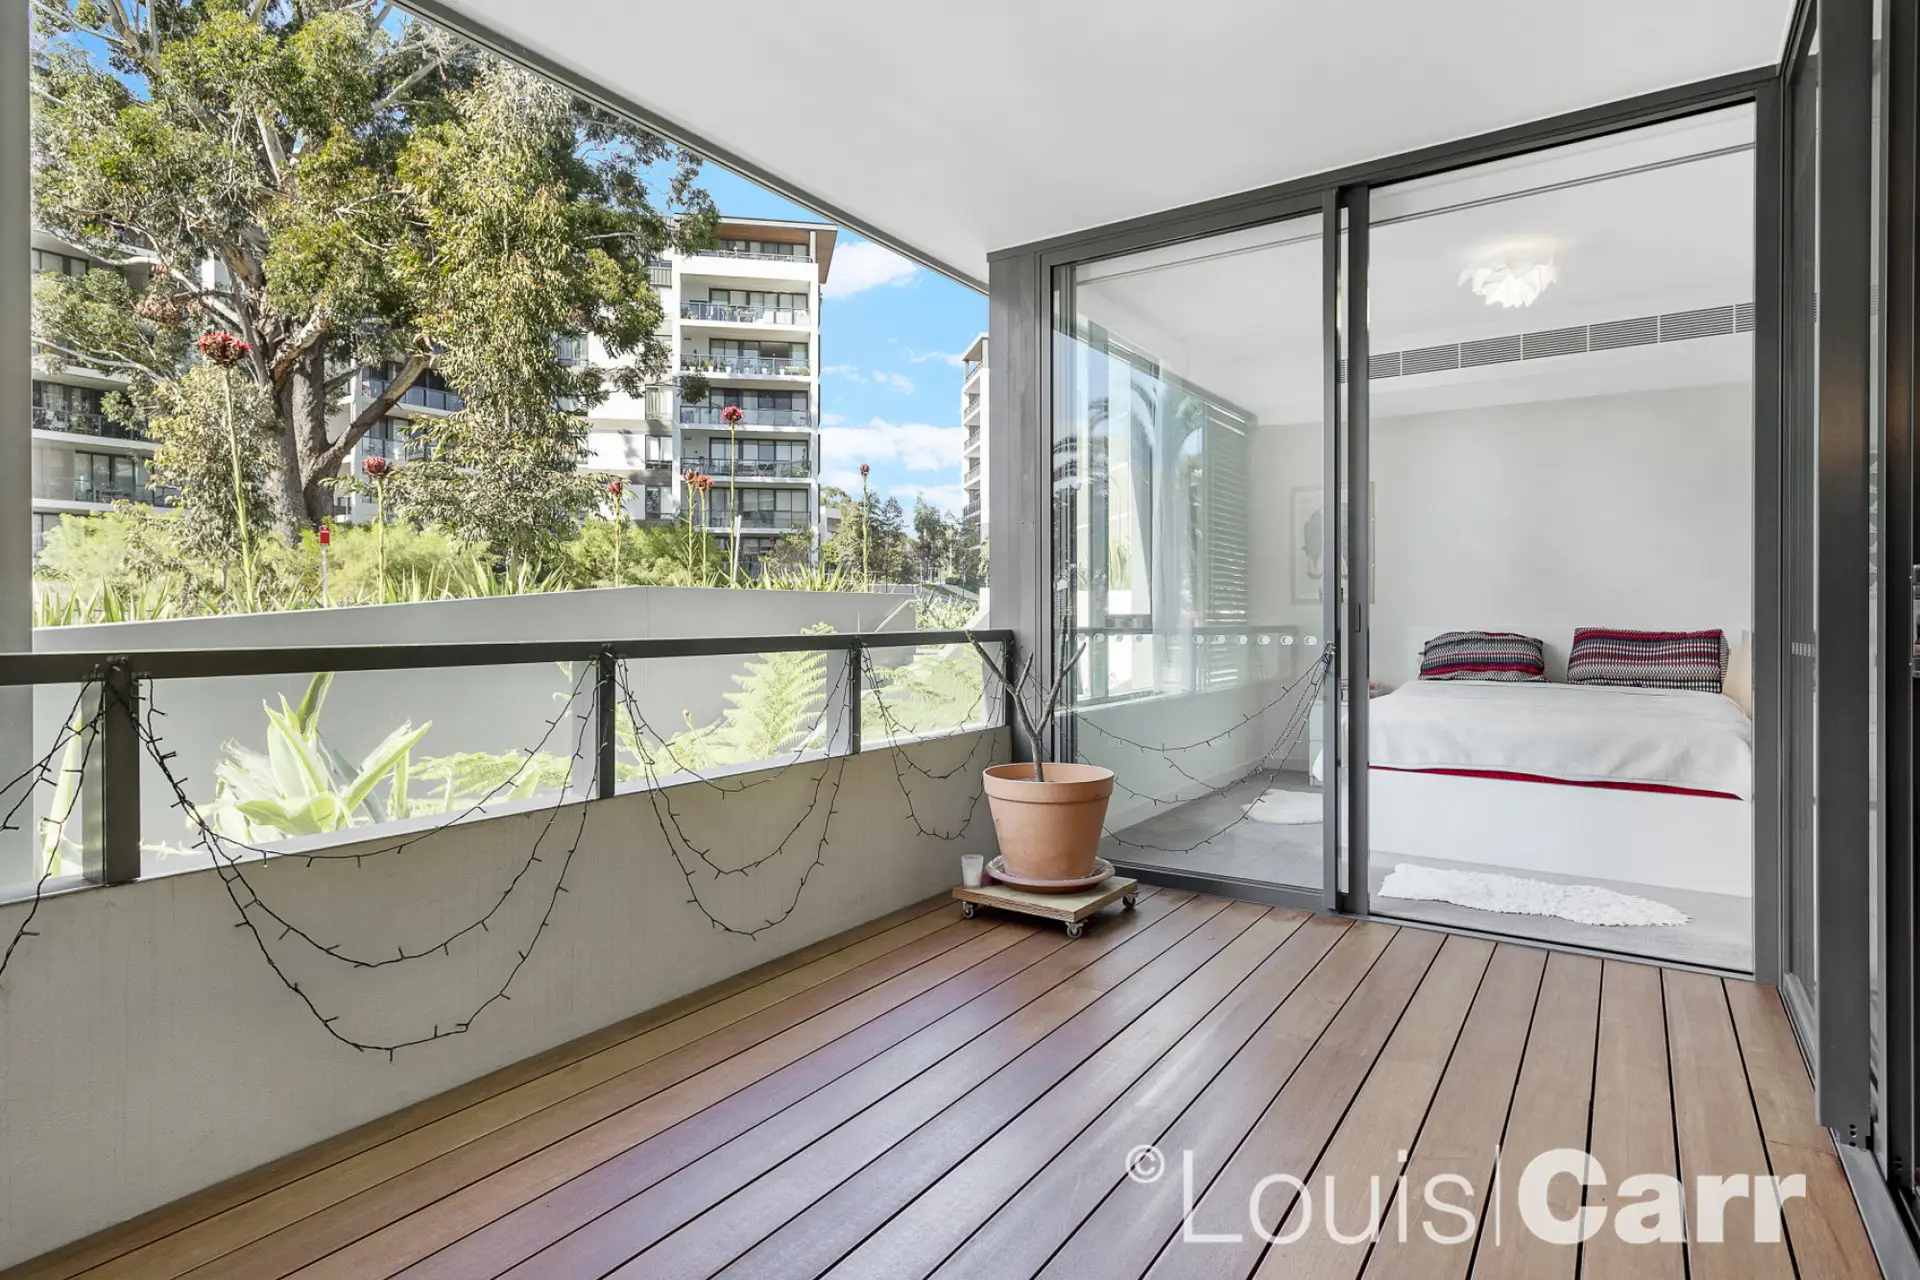 Photo #6: 101N/1 Lardelli Drive, Ryde - Sold by Louis Carr Real Estate